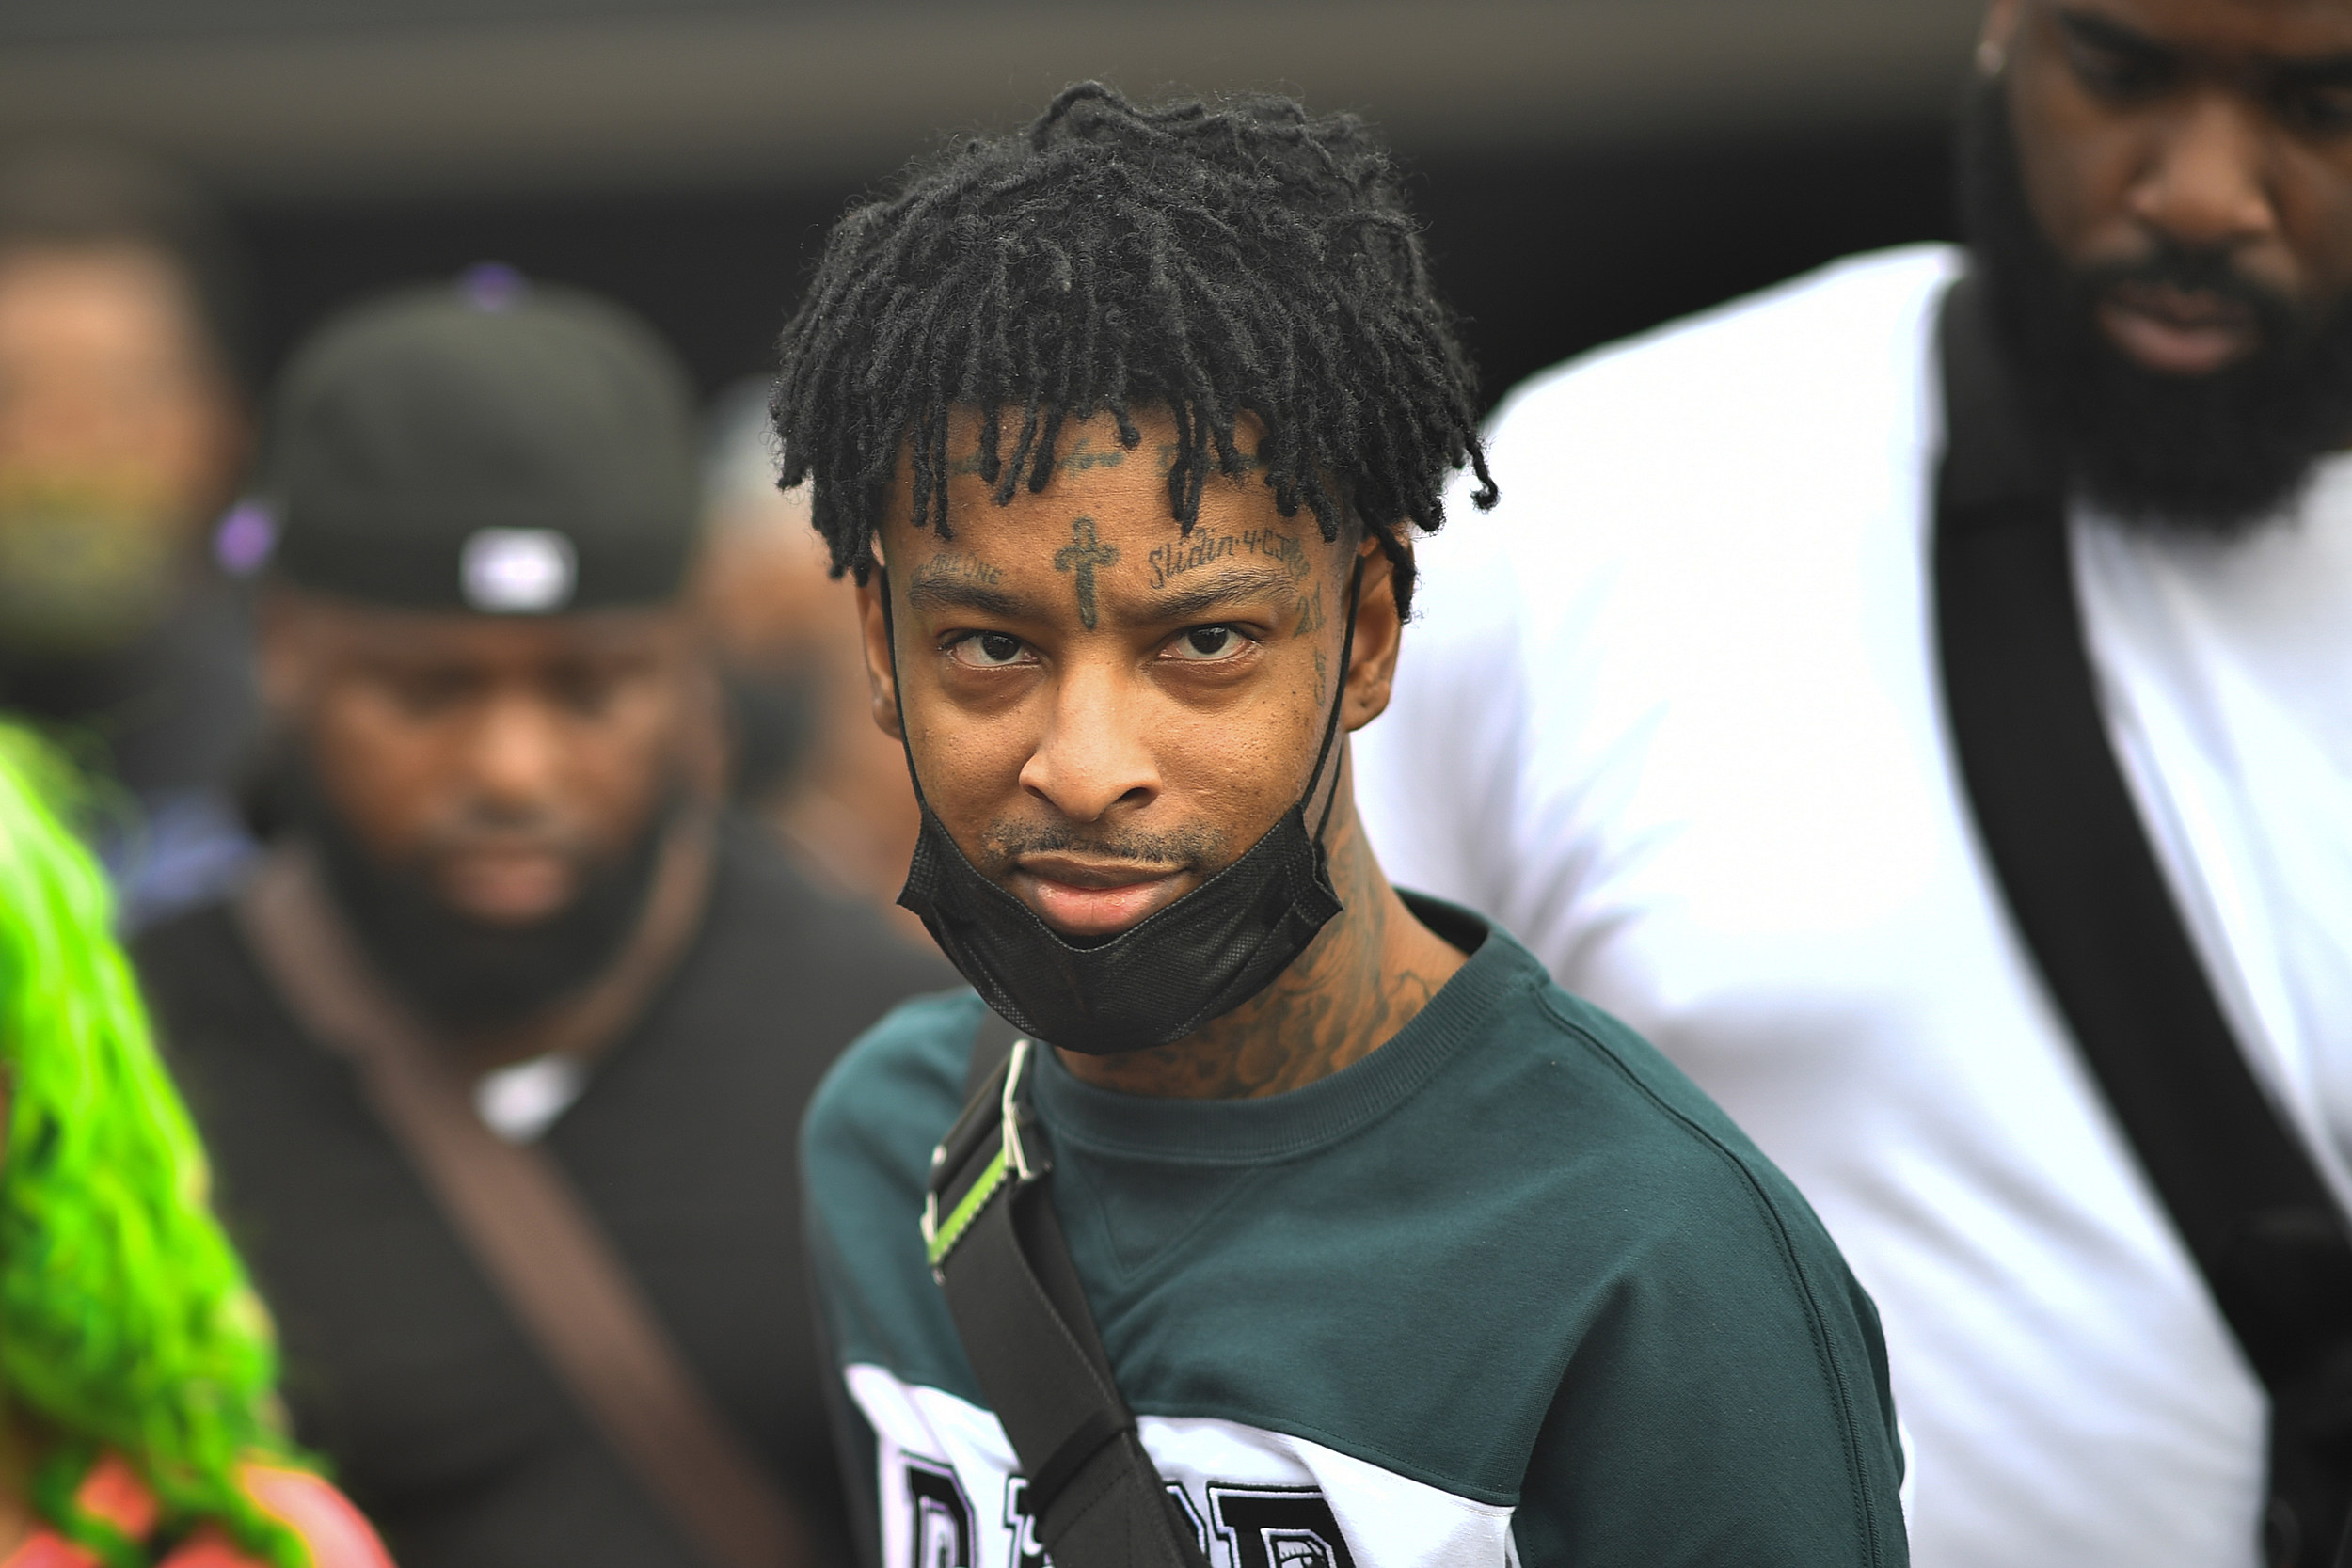 Is 21 savage married for citizenship｜TikTok Search